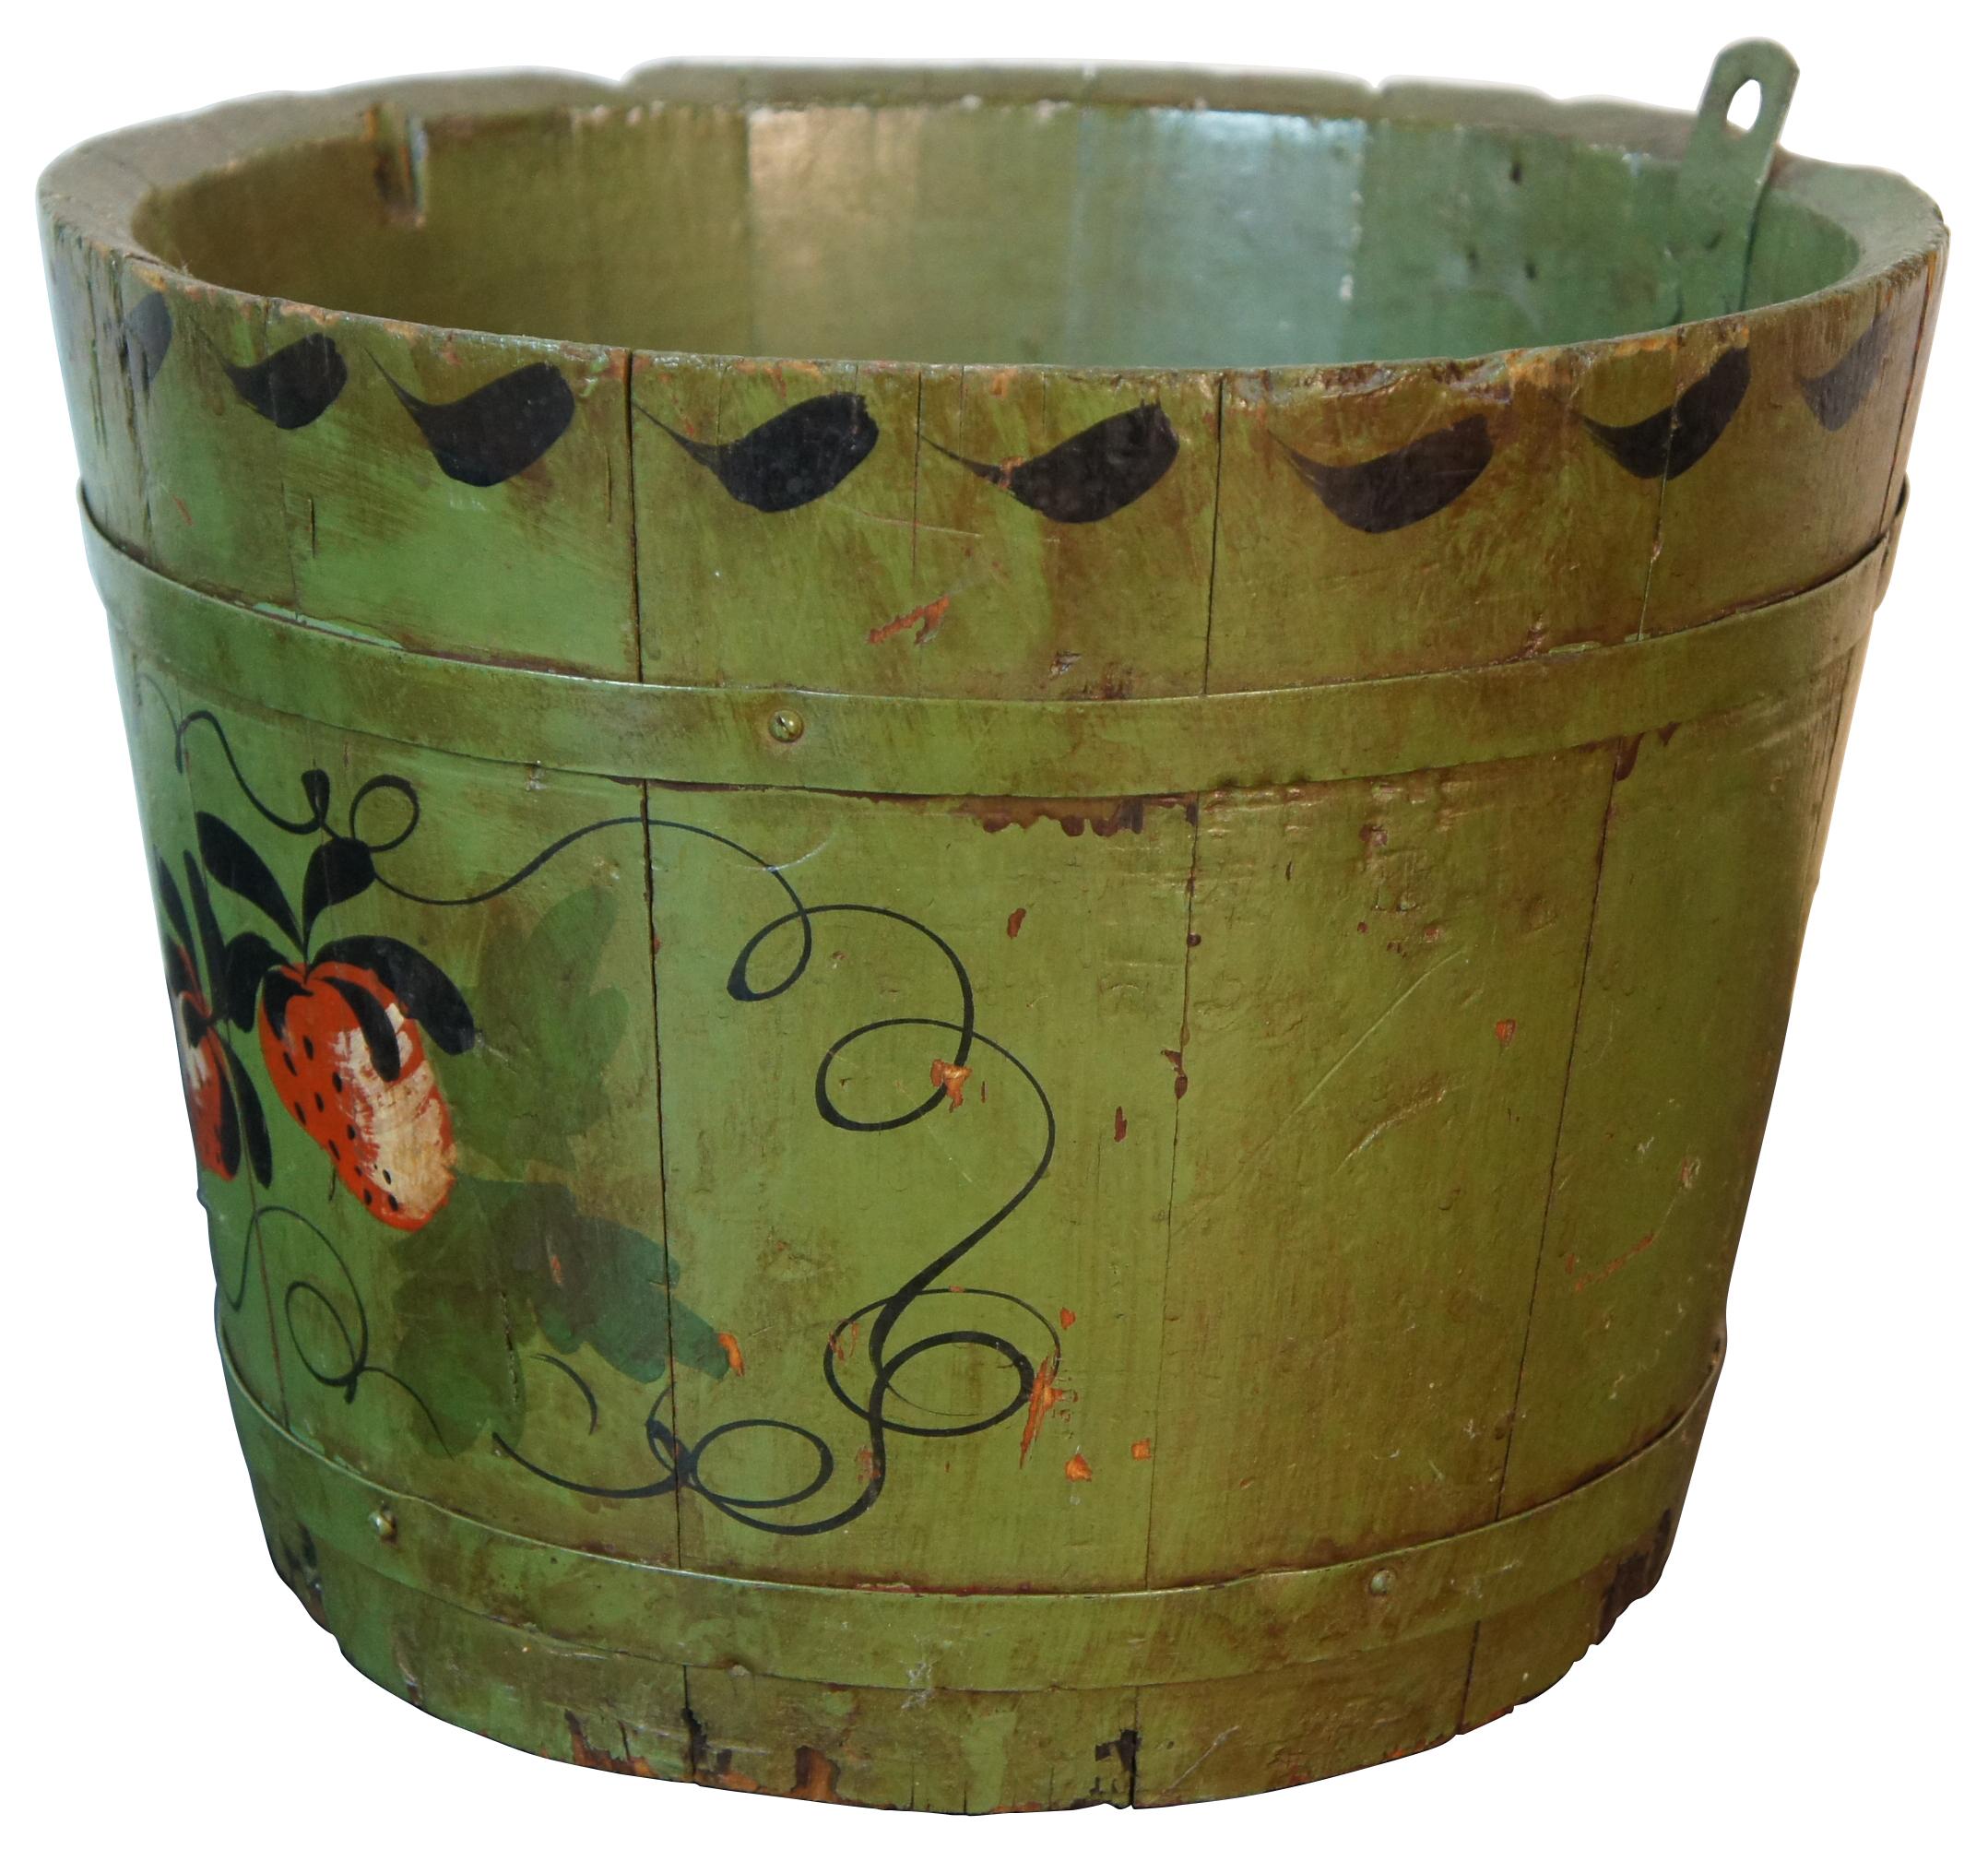 Antique Folk Art wooden firkin painted green with strawberries and black leaf border. Measure: 12